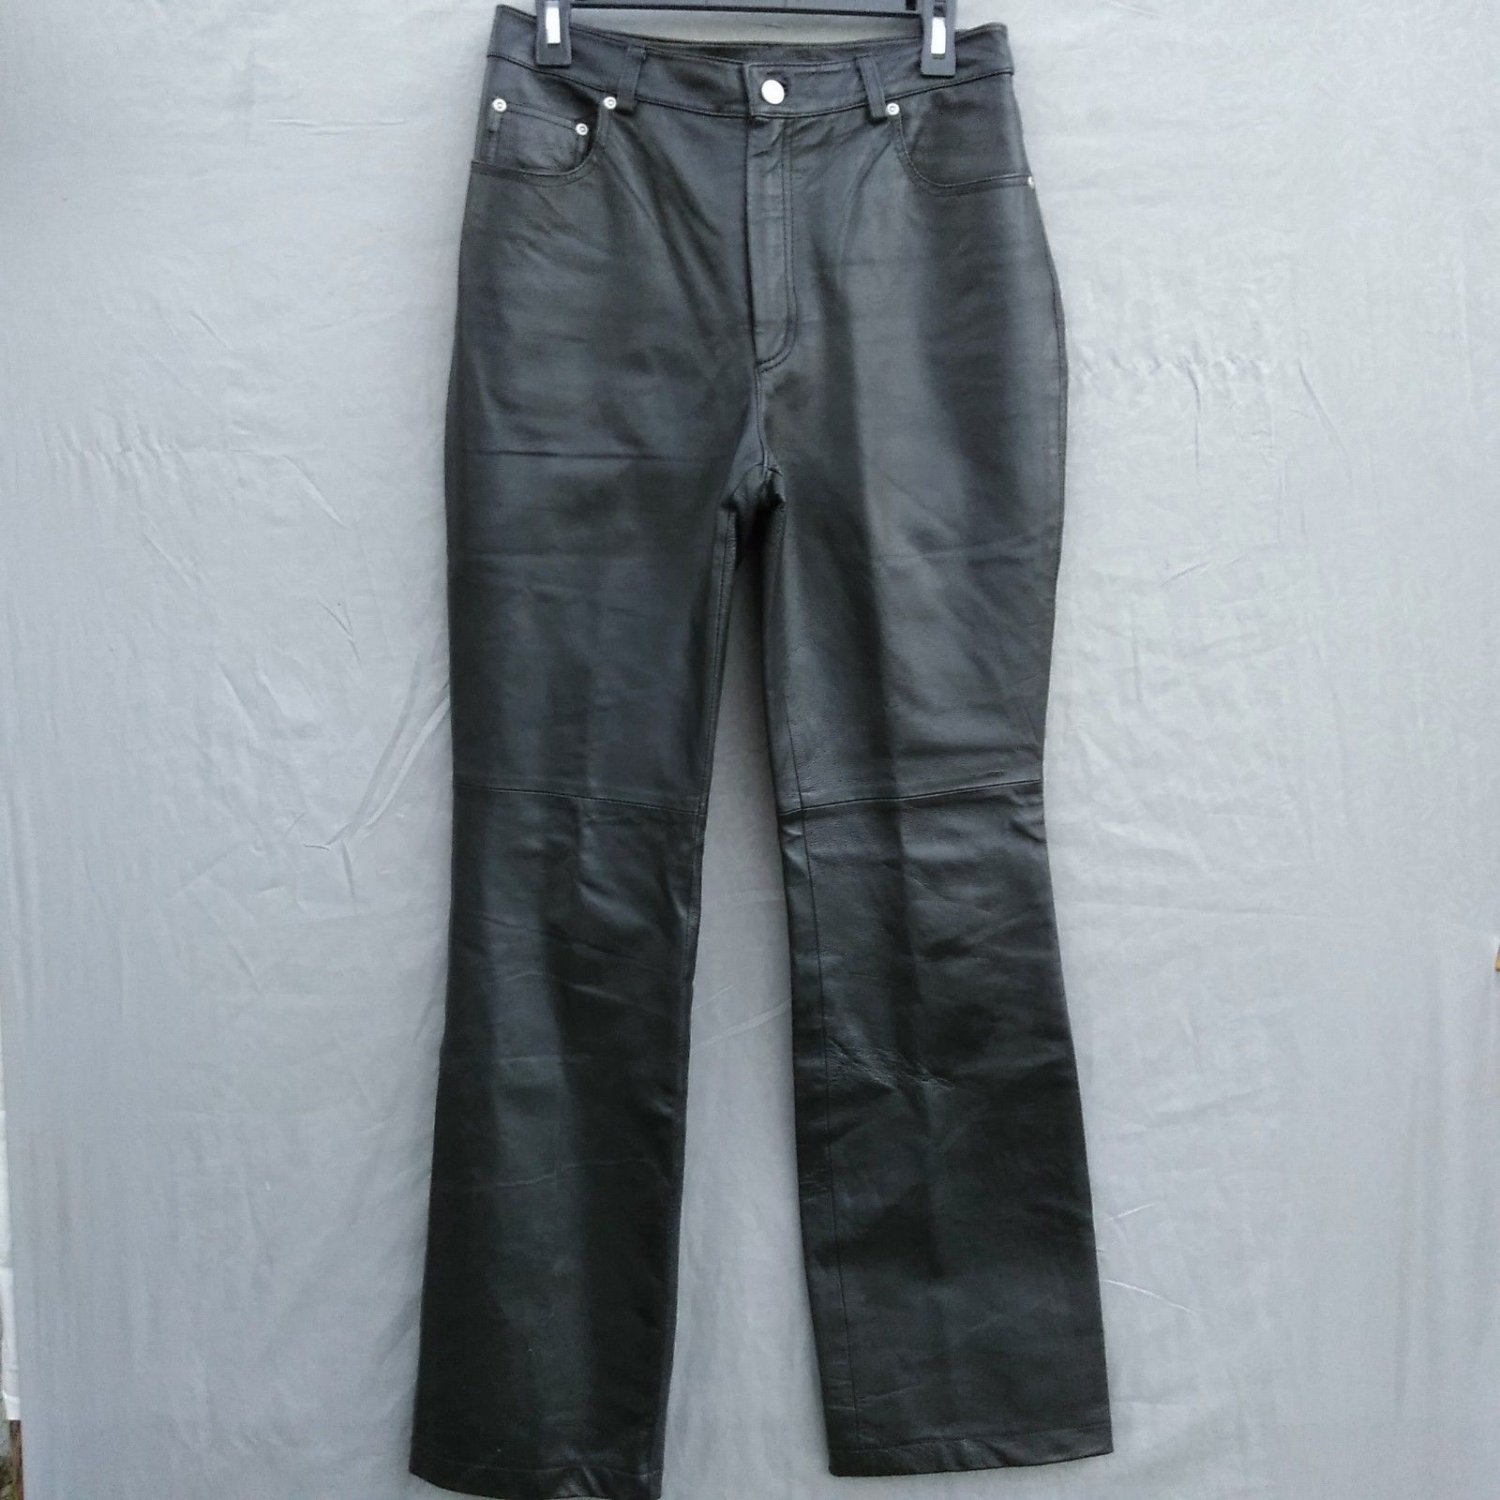 Newport News BootCut Womens Leather Pants Jean Style Size 8